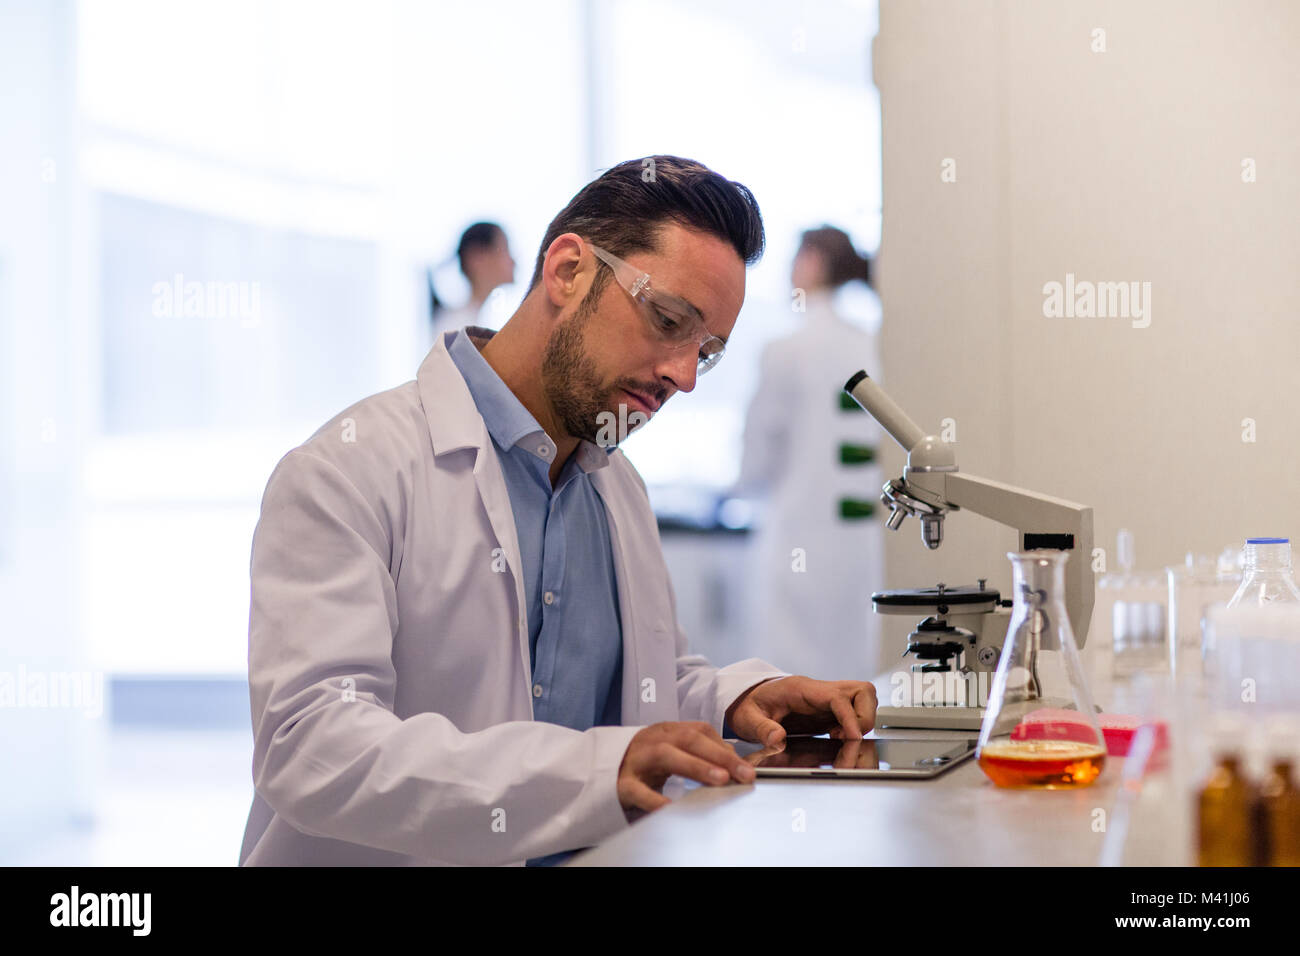 Male scientist looking at results of experiment on digital tablet Stock Photo